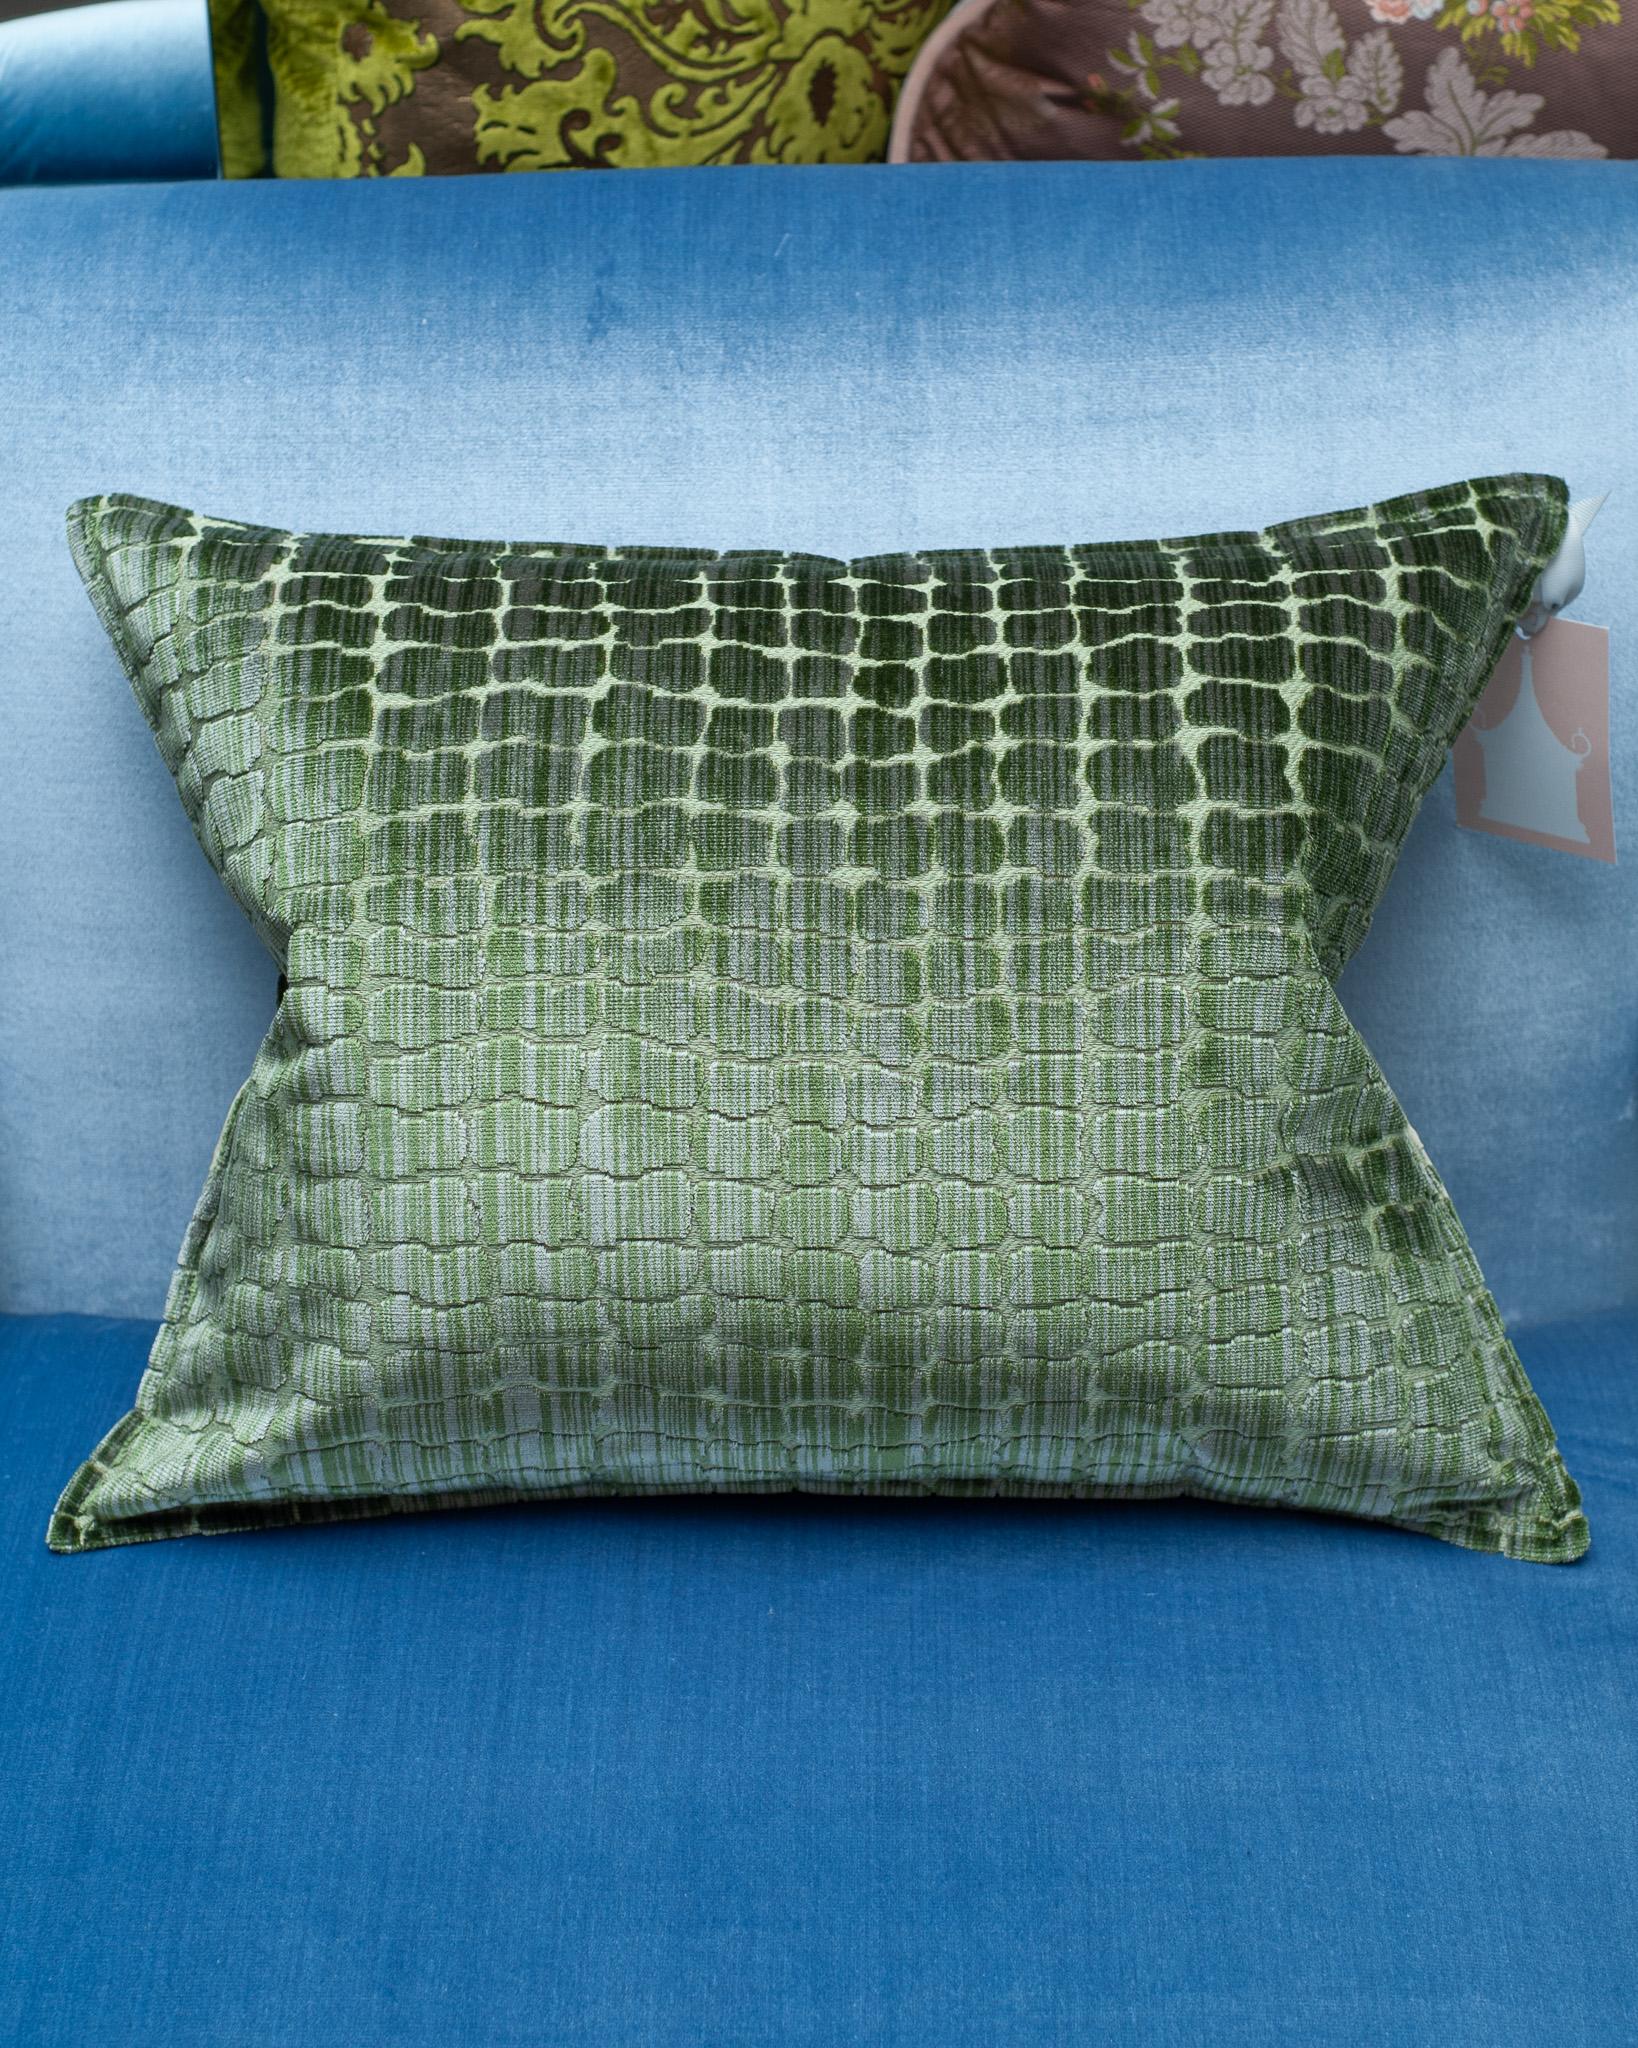 A stunning Bevilacqua Tessuti silk velvet pillow in green with crocodile pattern. Made in Bevilacqua's workshop for Maison Nurita, this luxurious pillow is backed in Bevilacqua creme silk moiré. Filled with the highest quality down and feather